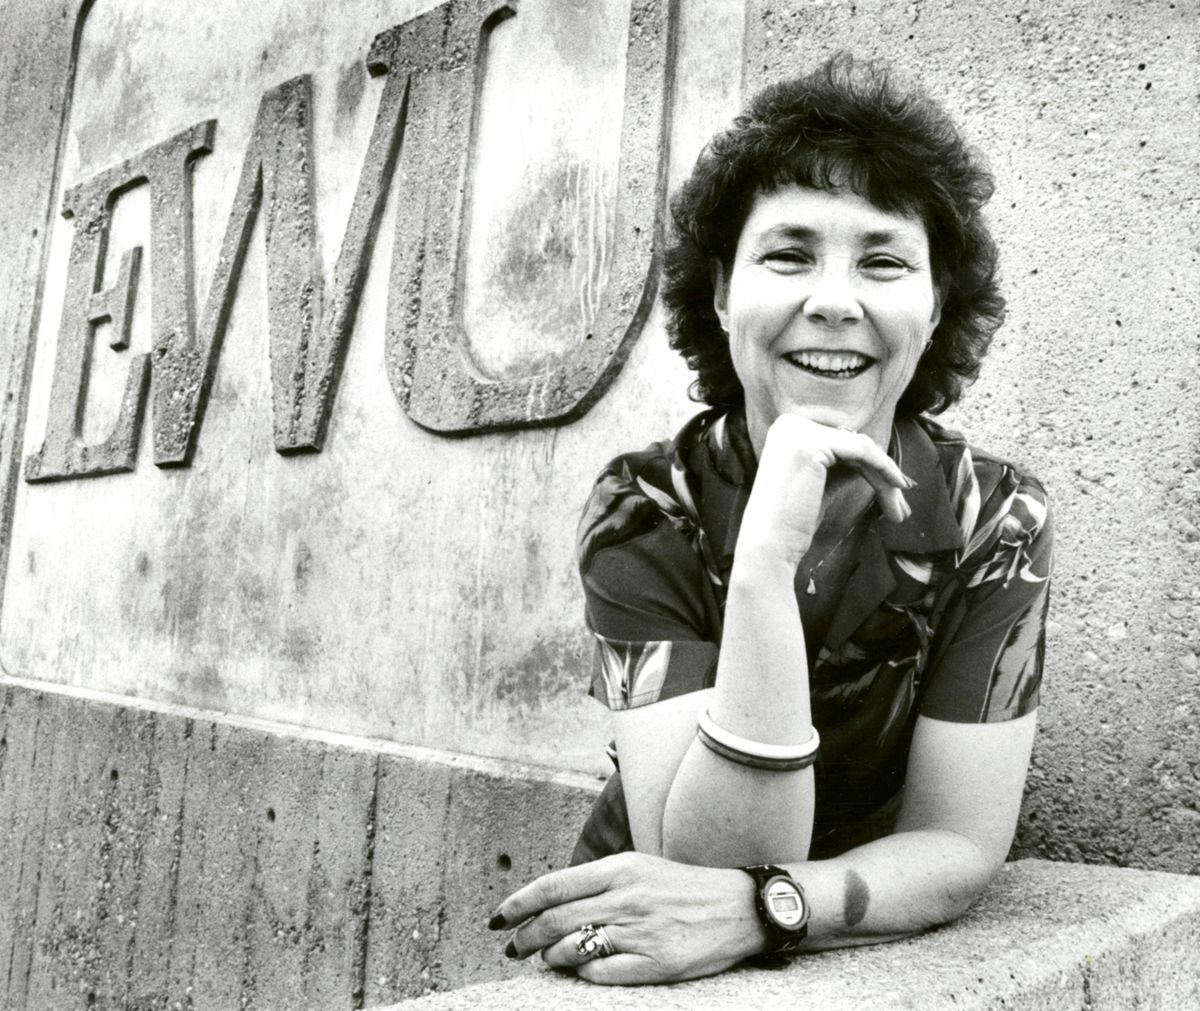 Maxine Davis taught physical education, health and dance at Eastern Washington University in 1989.  (Dan Pelle/The Spokesman-Review)